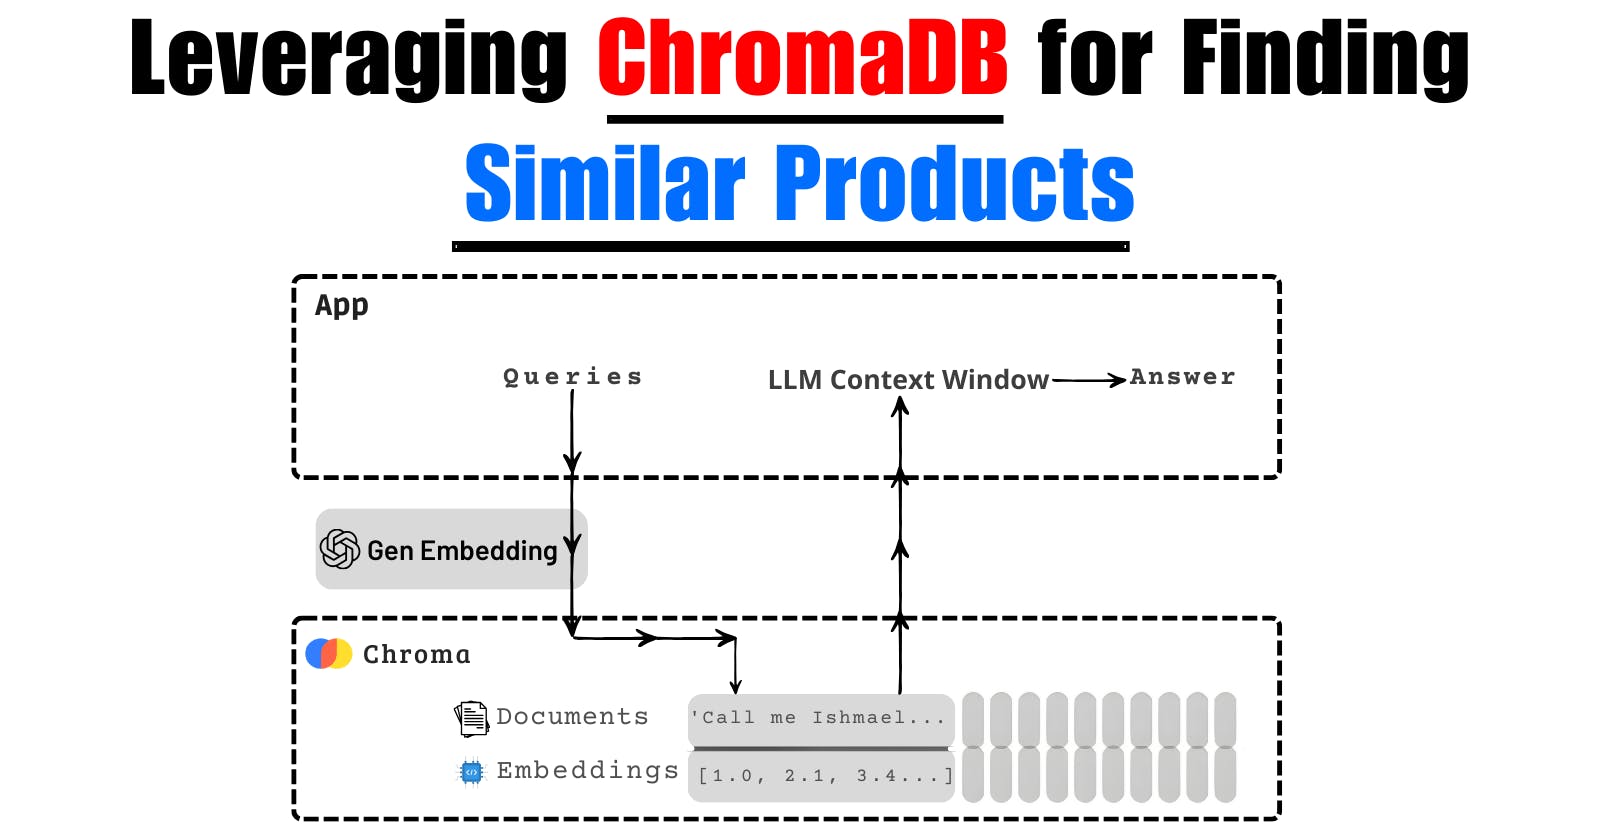 Leveraging ChromaDB for Finding Similar Products